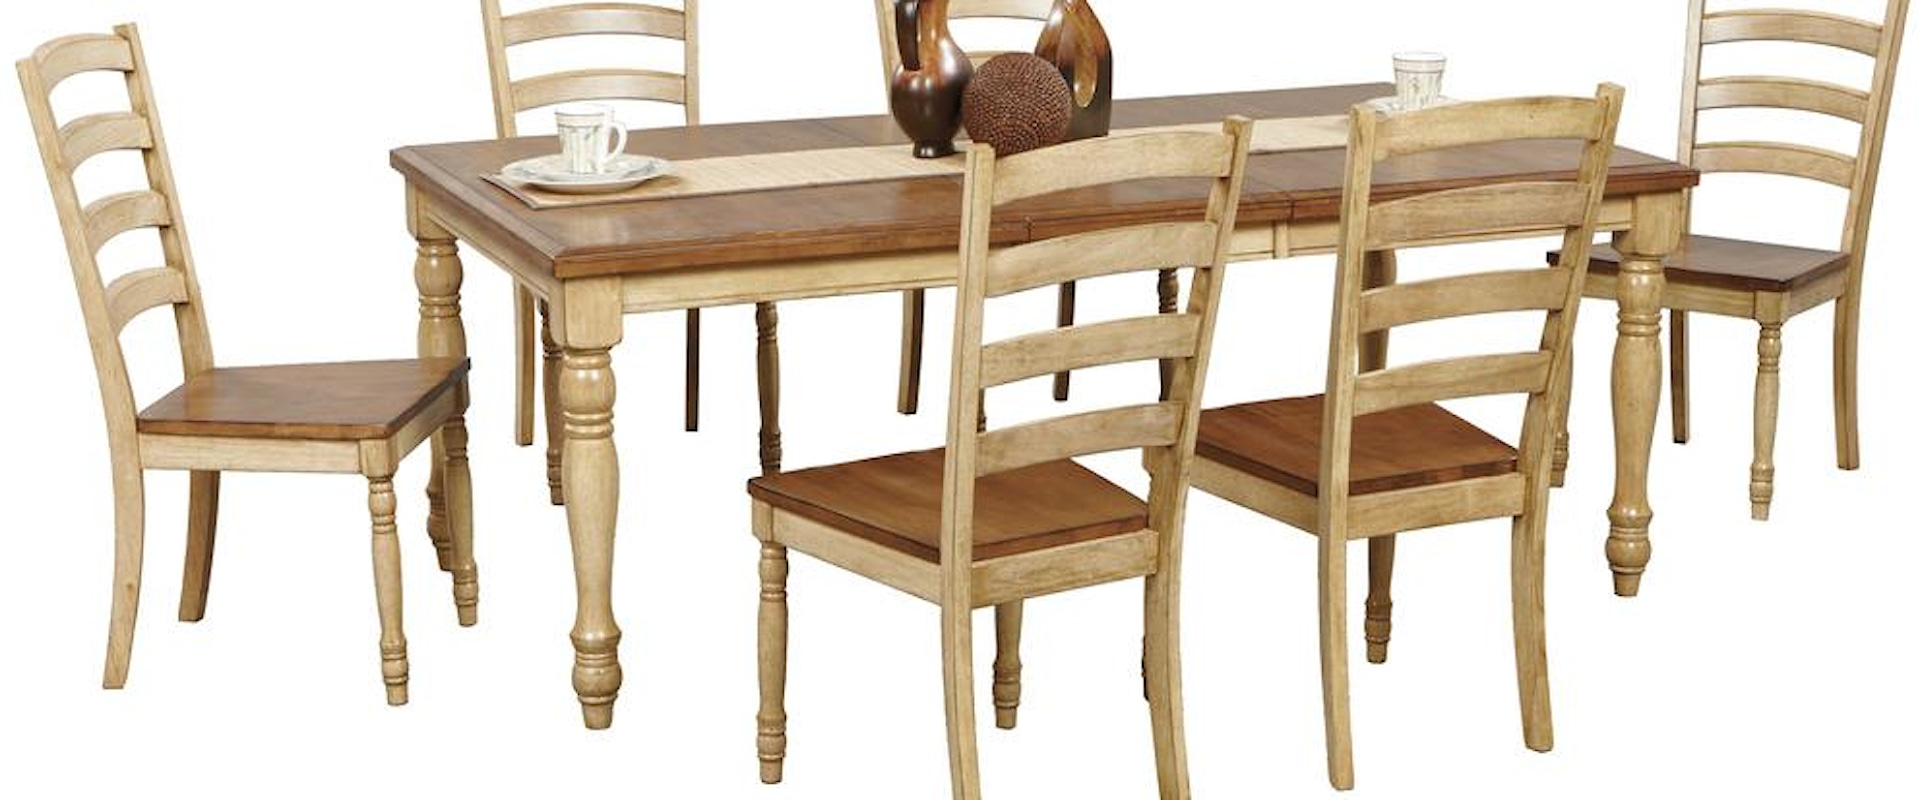 7 Piece Turned Leg Table and Ladderback Chair Set